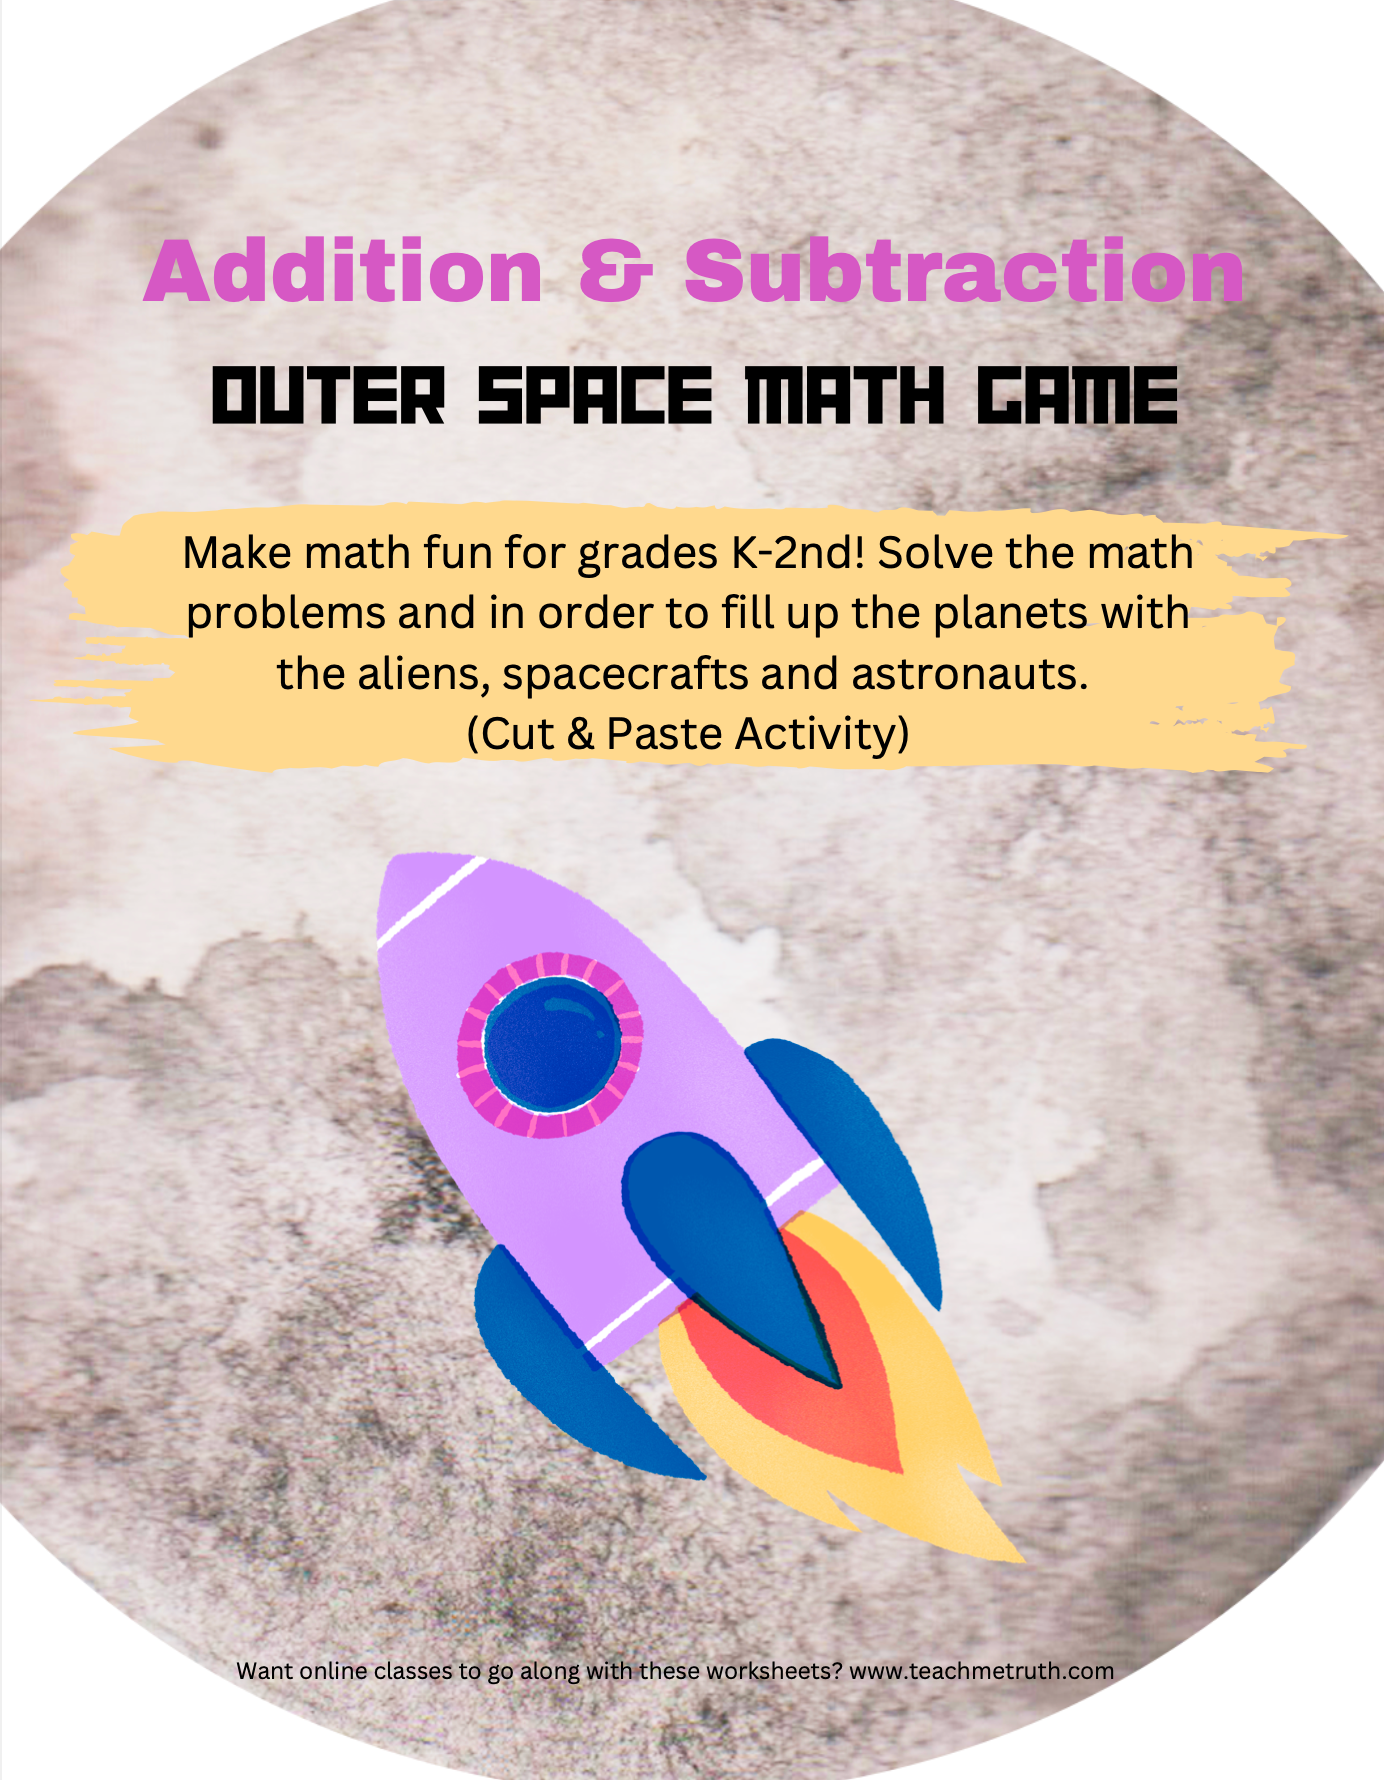 Outer Space Cut & Paste Math Activity Game